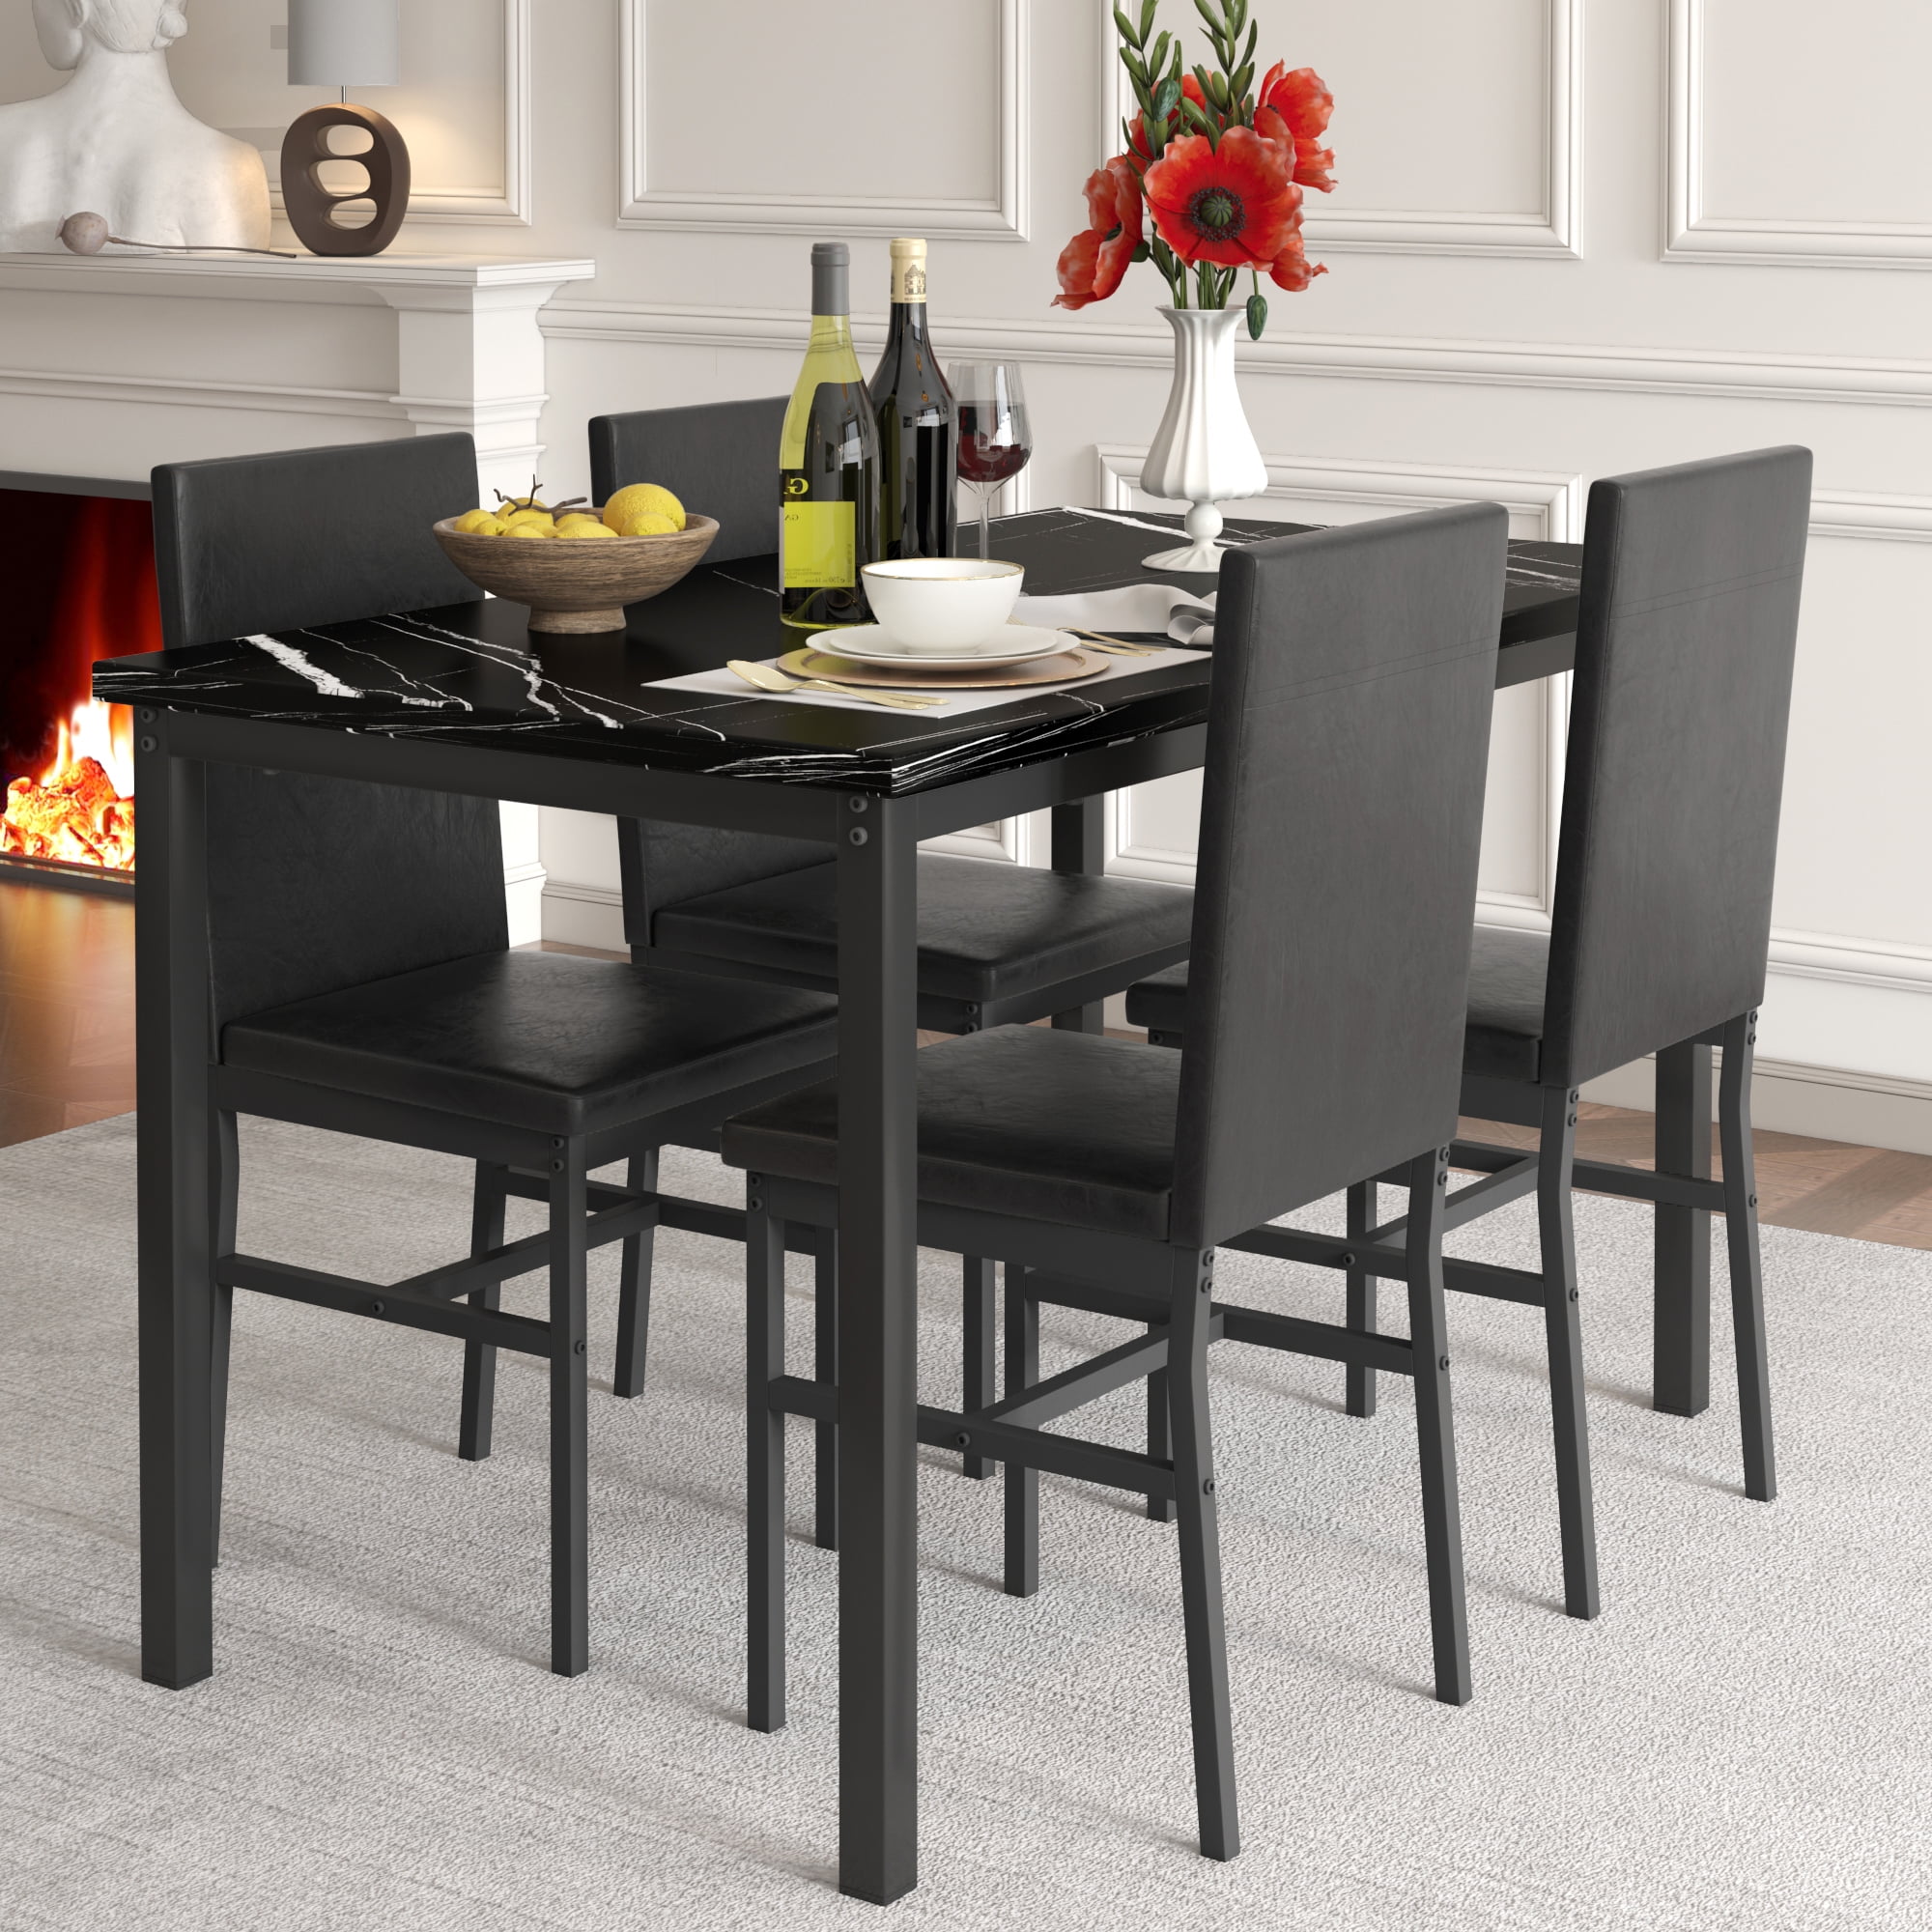 SYNGAR 5 Piece Dining Set Modern Table Chairs Set 4 Kitchen Faux Marble Tabletop 4 PU Leather Upholstered Chairs Small Space Breakfast Nook D8914 D3398f02 Ba5b 4105 Adae 991bf7227e8e.453c52f5b5ff827a5059aef9f7974642 